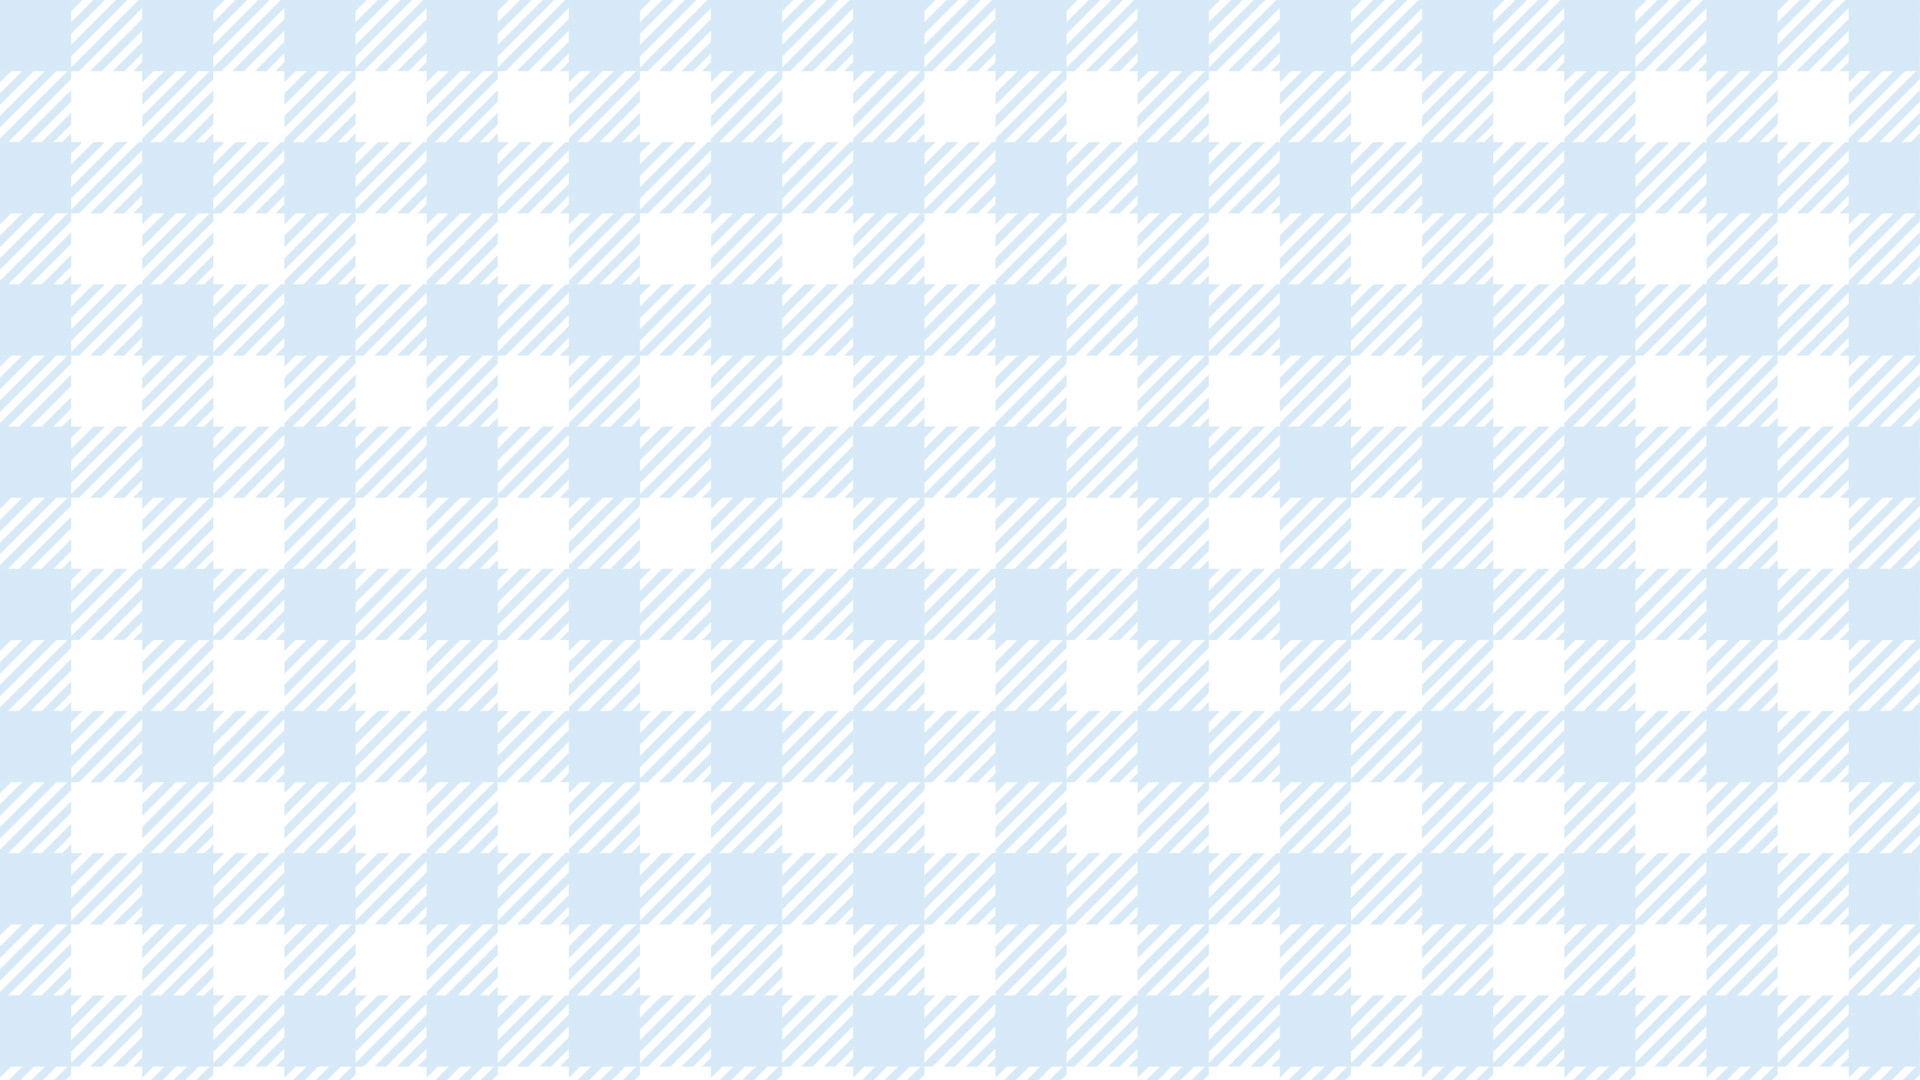 A blue and white checkered pattern - Checkered